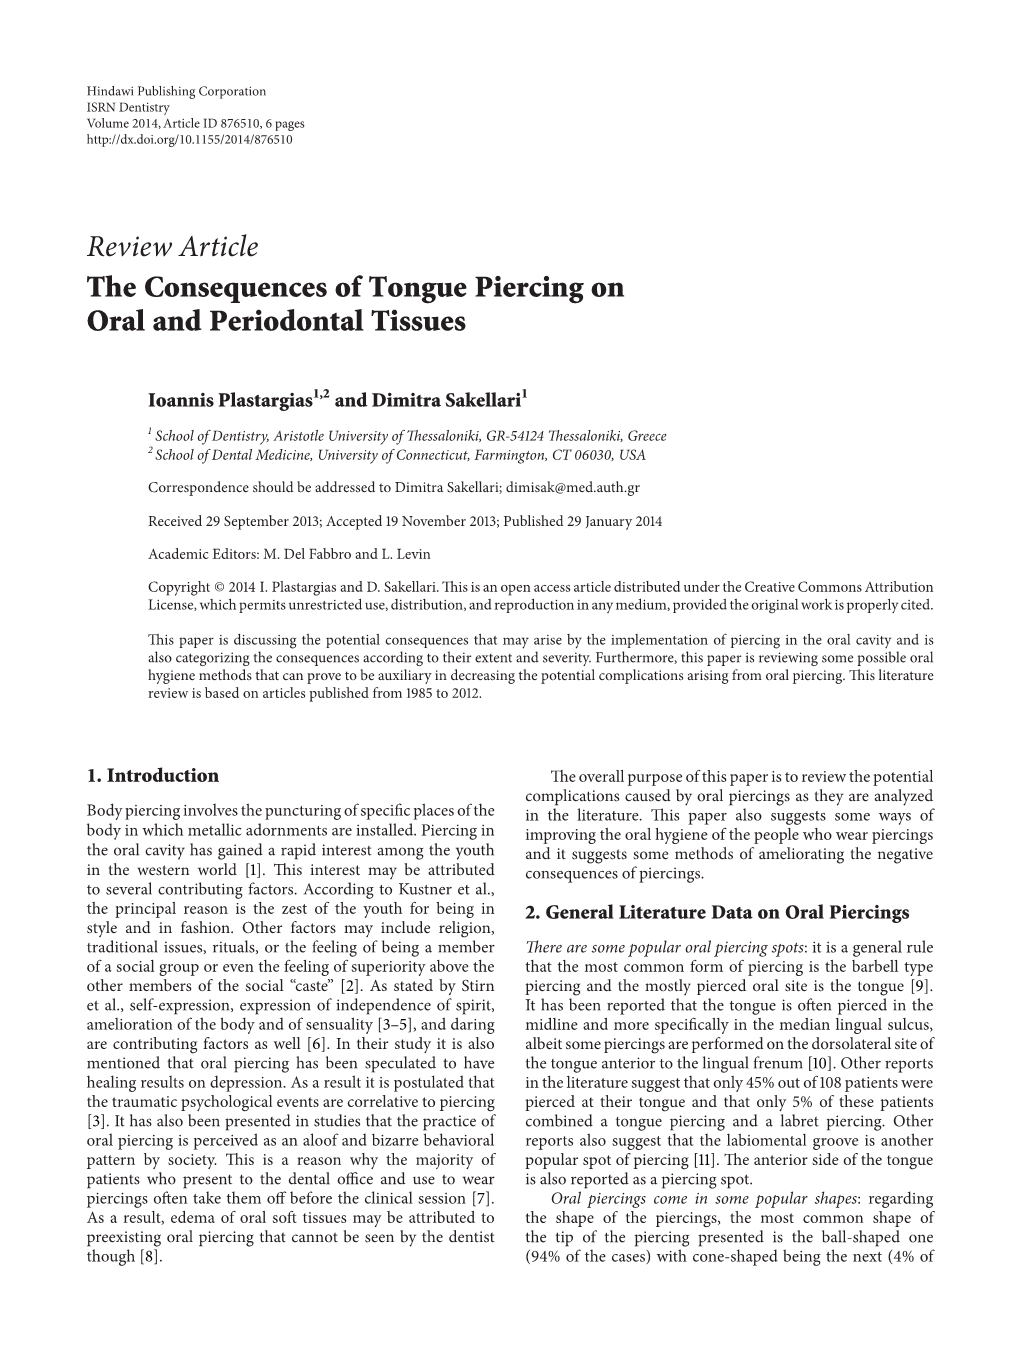 The Consequences of Tongue Piercing on Oral and Periodontal Tissues